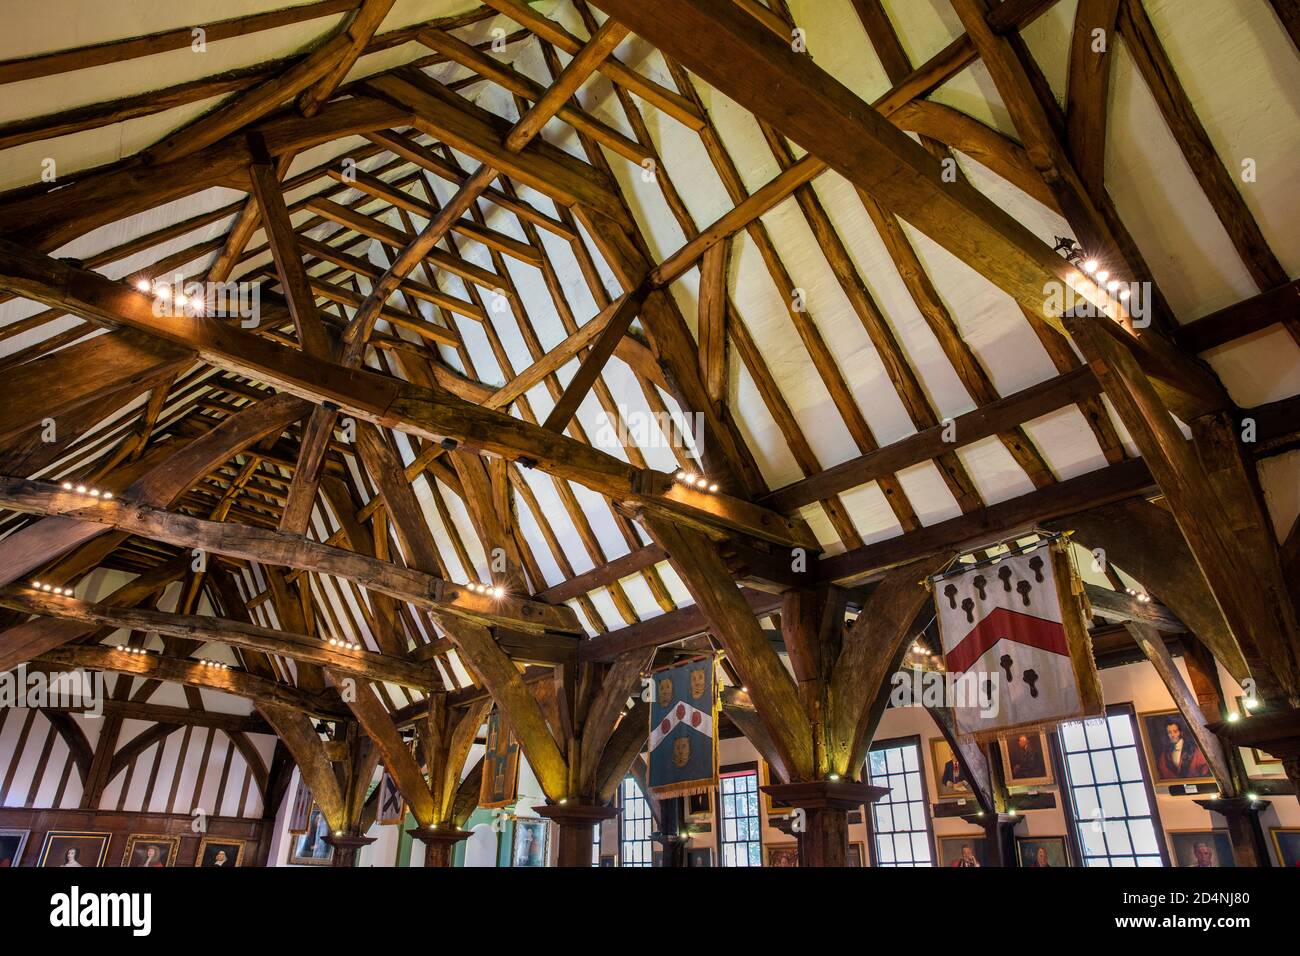 UK, England, Yorkshire, York, Piccadilly, Merchant Adventurers Hall, C14th meeting place, great hall roof Stock Photo